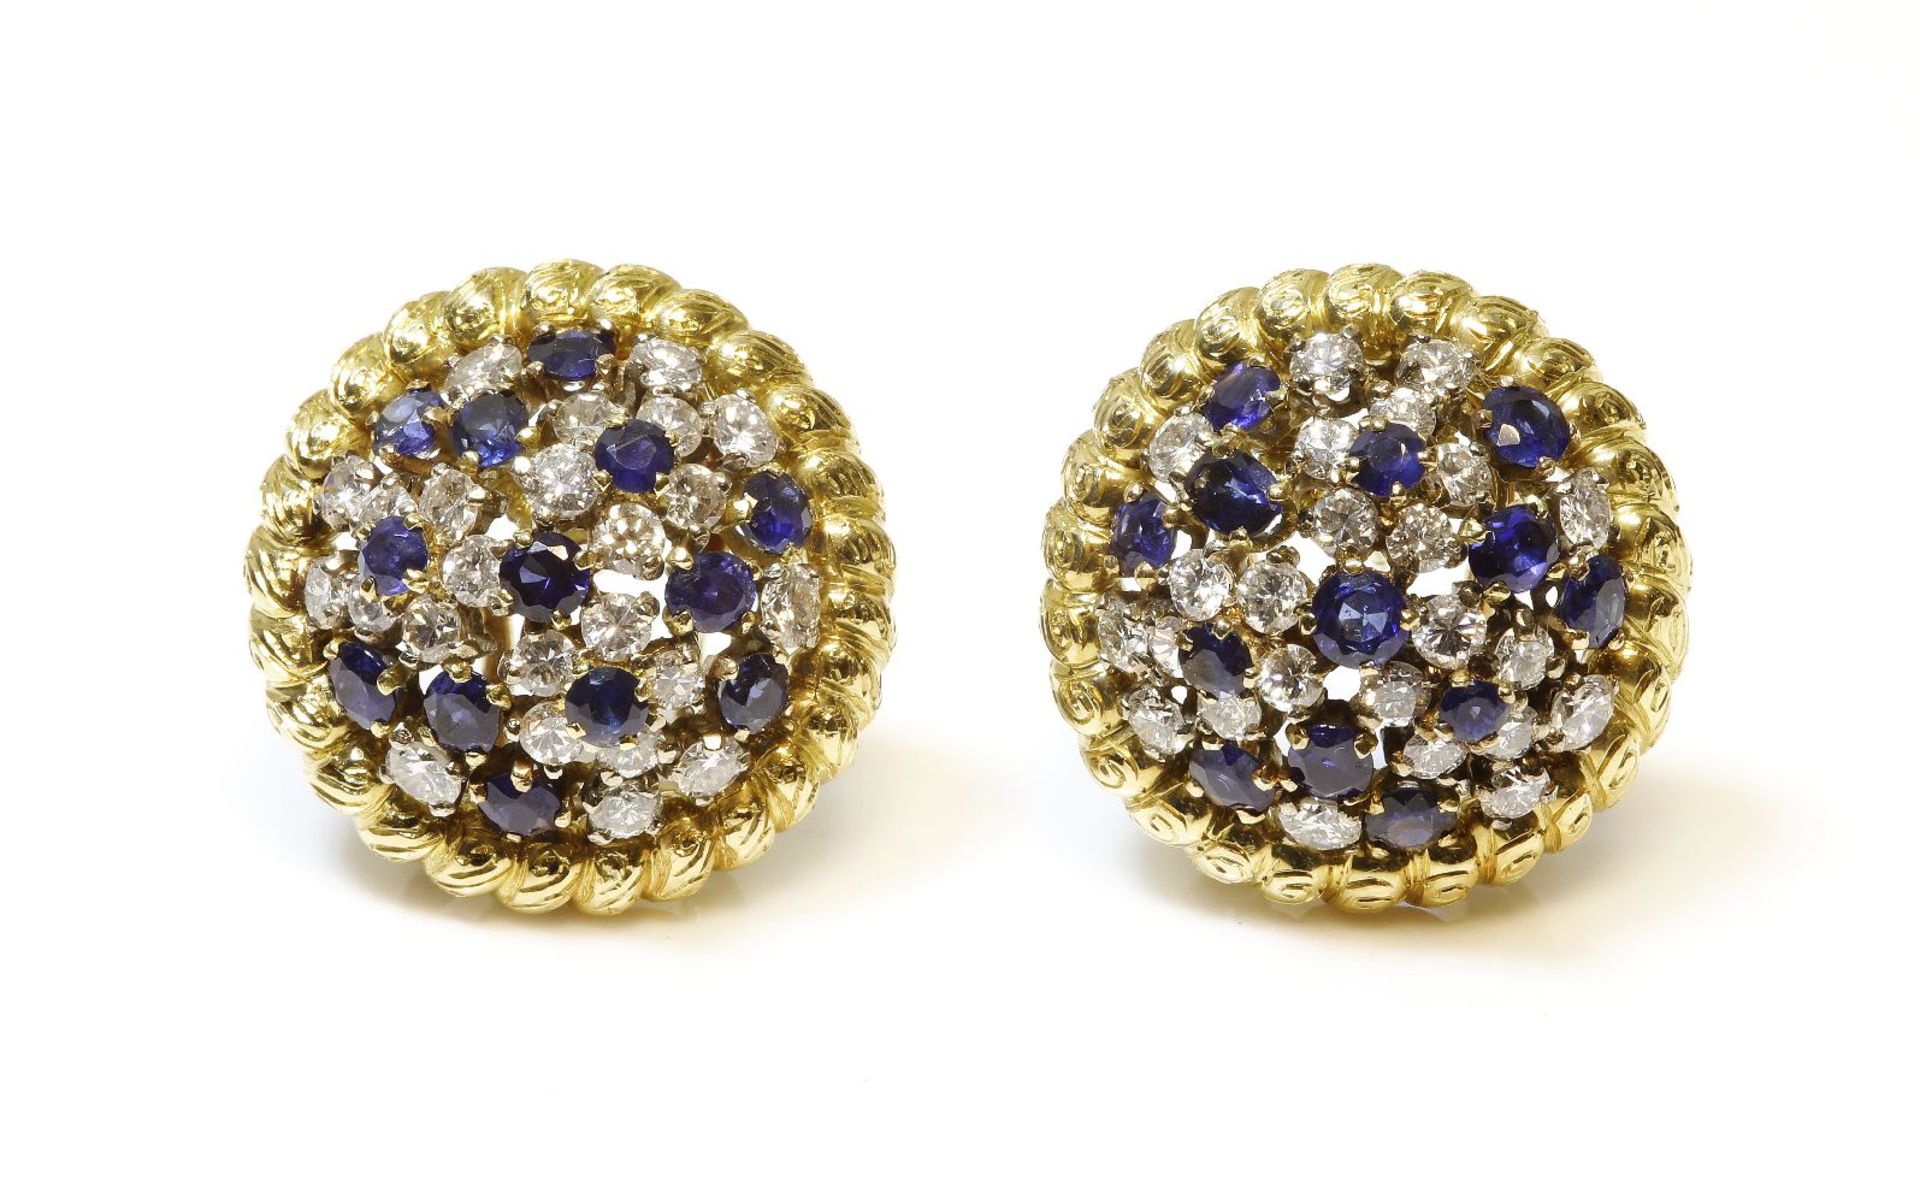 A pair of sapphire and diamond cluster earrings,each circular domed earring set with a dispersed